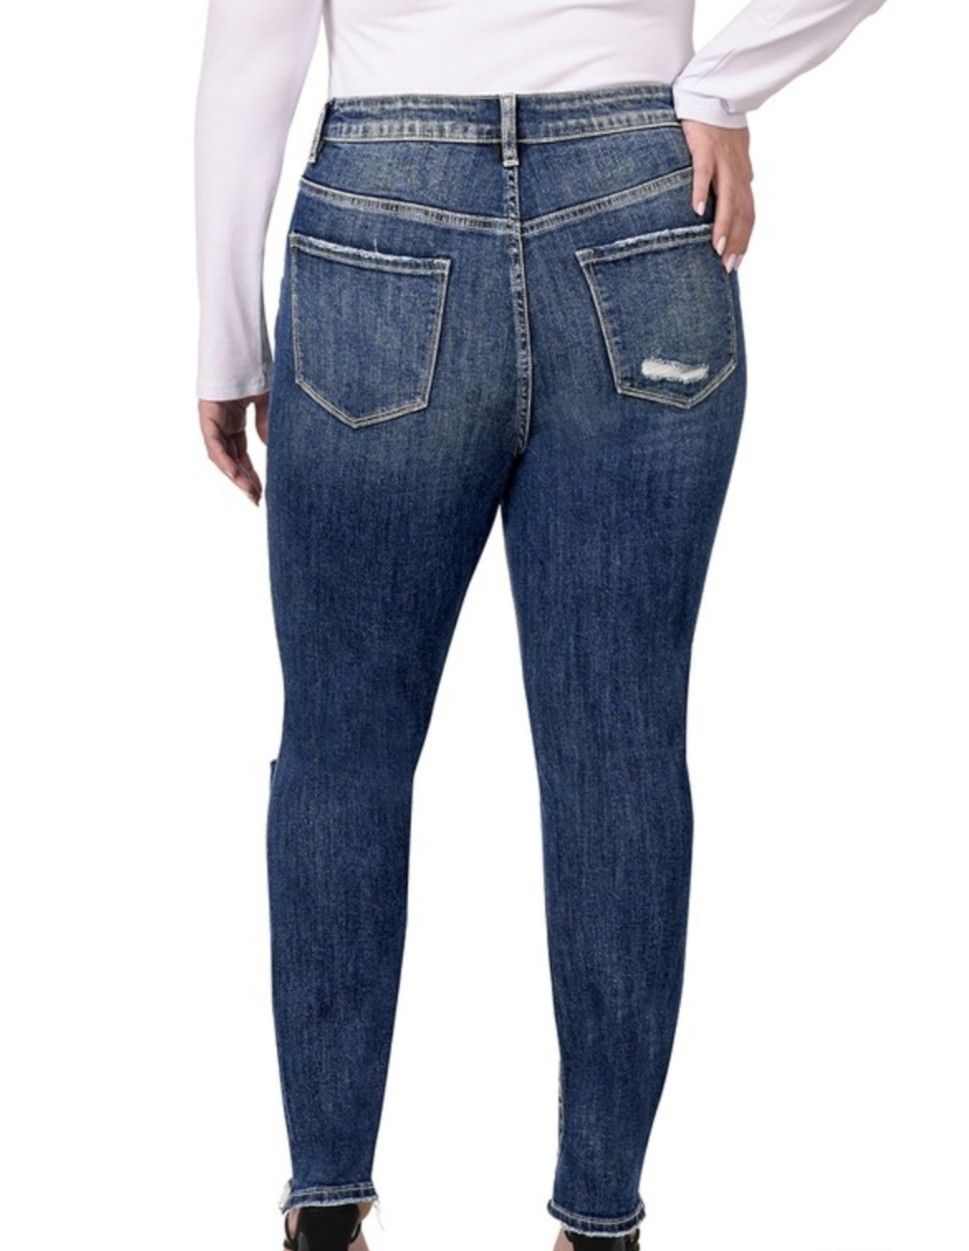 The Bobbie KanCan Jeans - Curvy Collection - In Store & Online